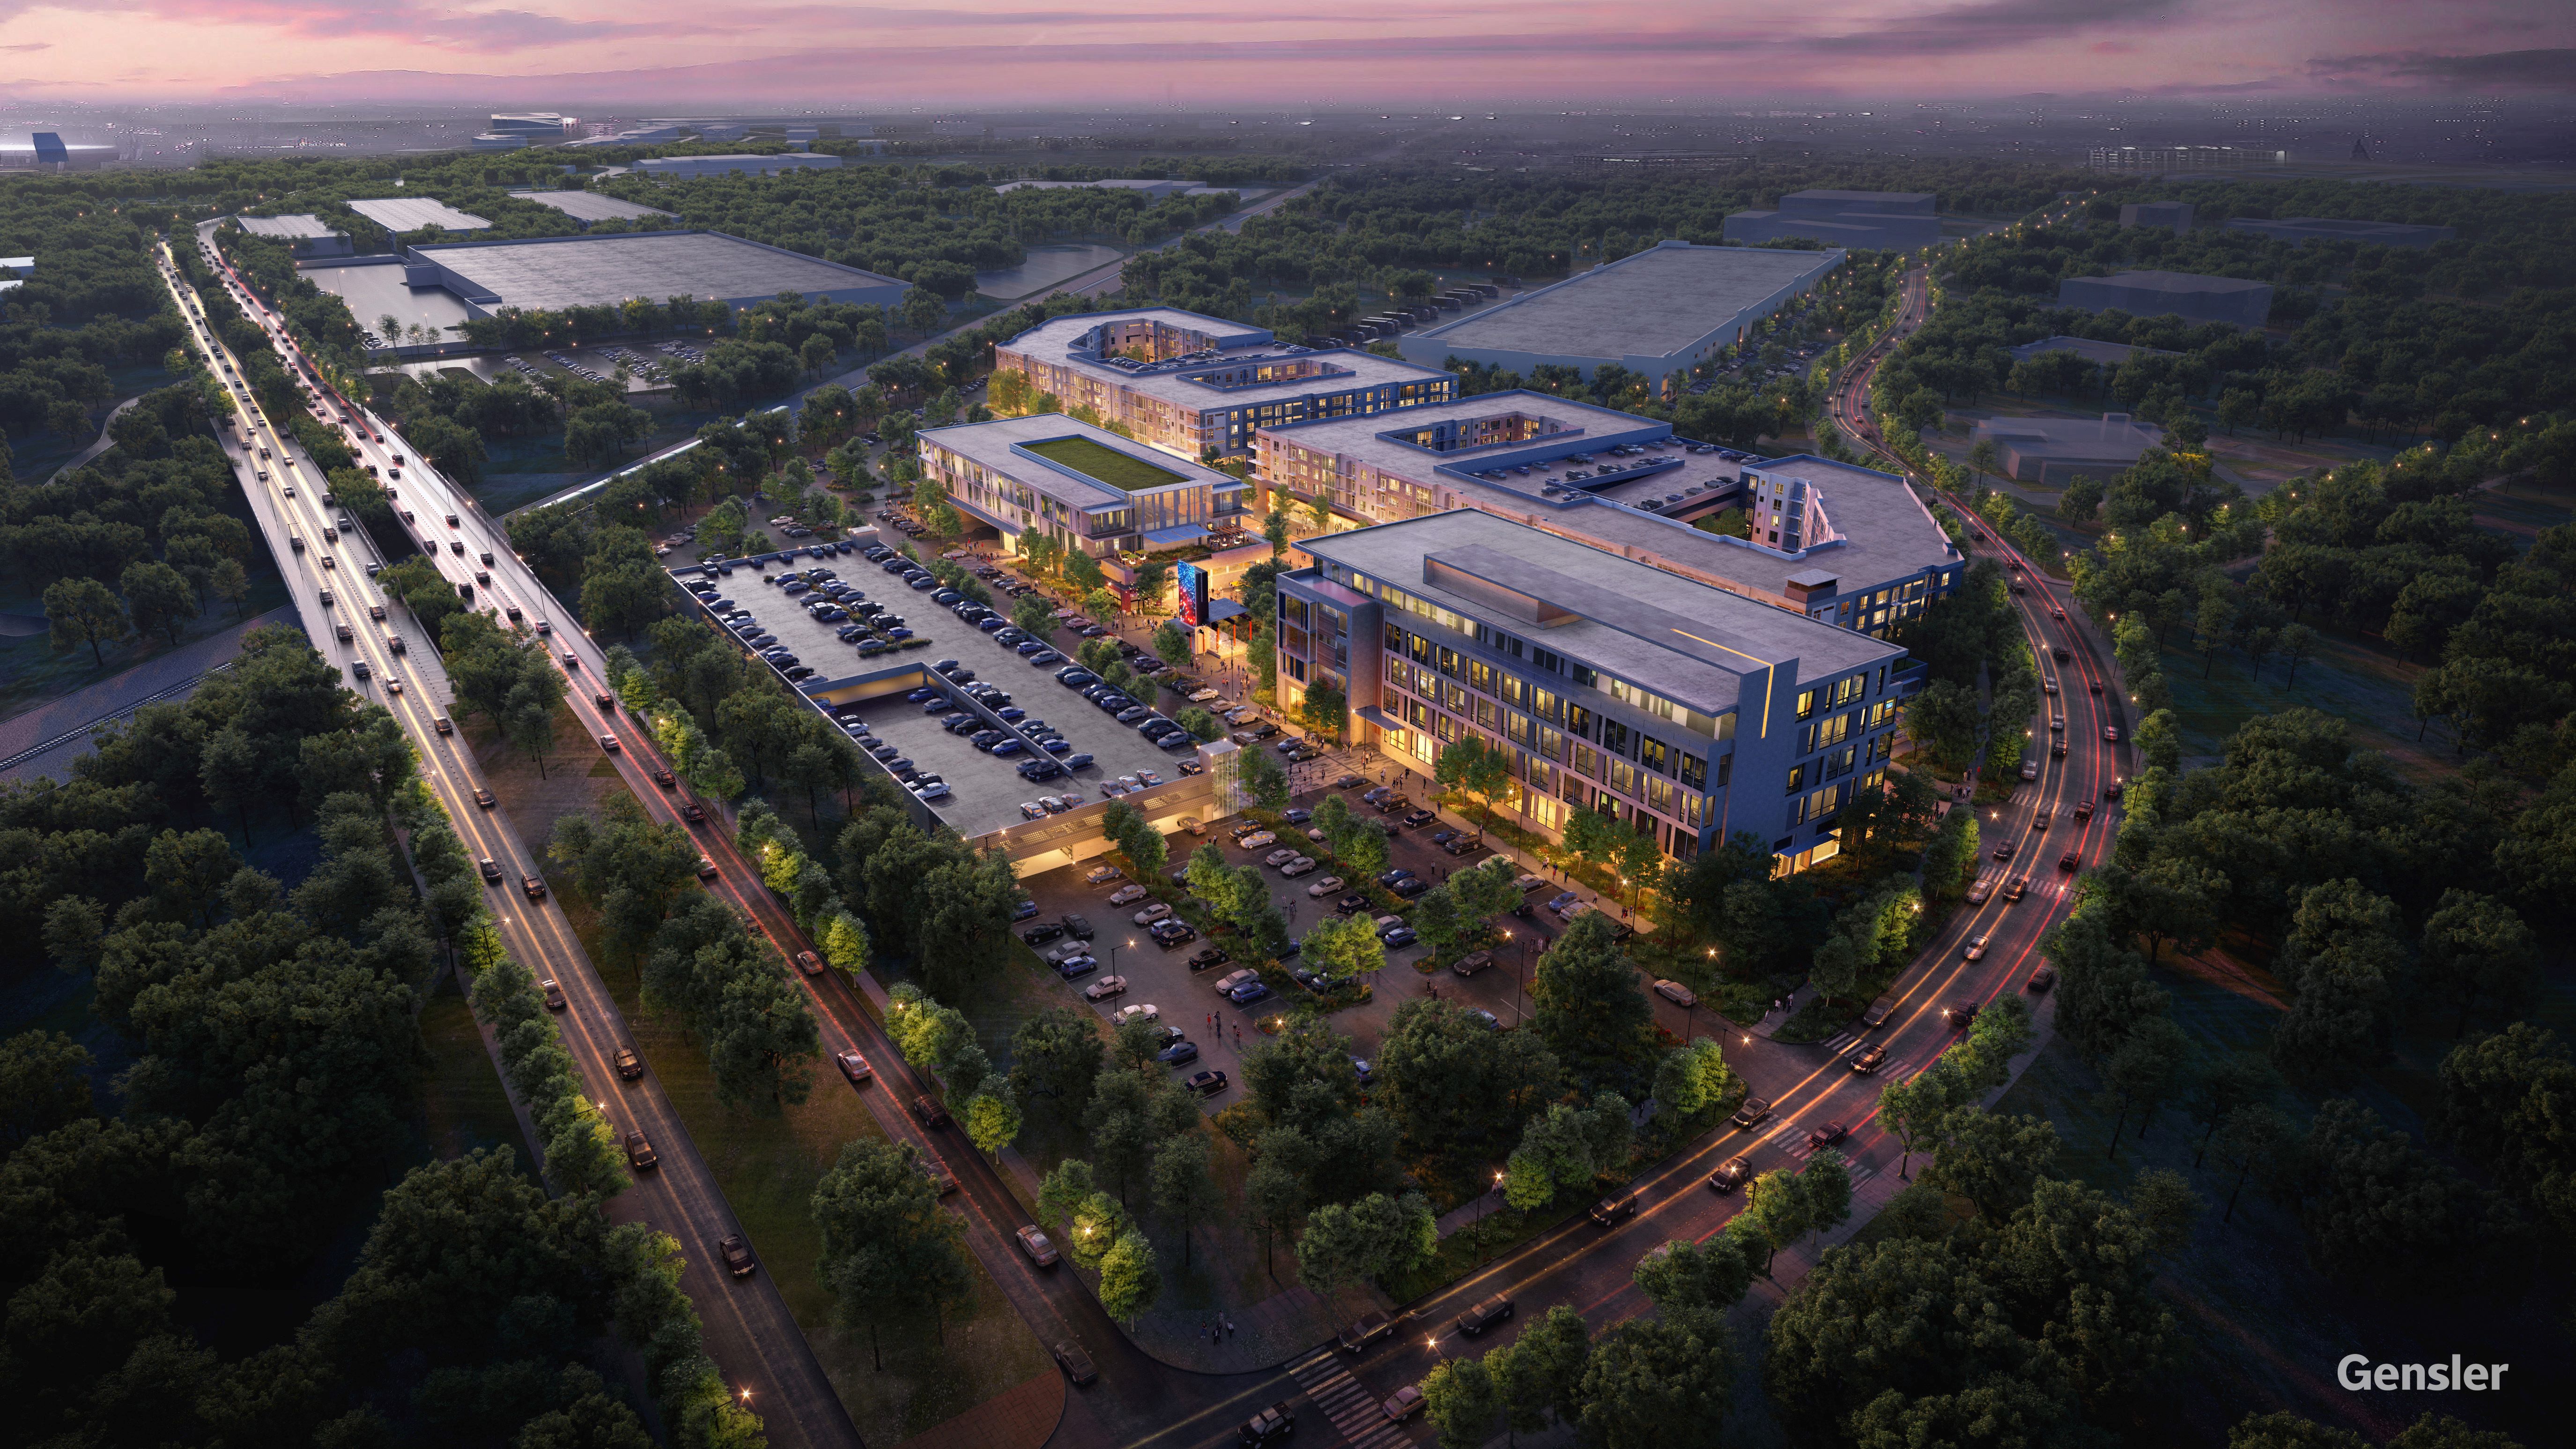 Innovation Corridor Set to Change the Face of Mansfield and the South of DFW Region